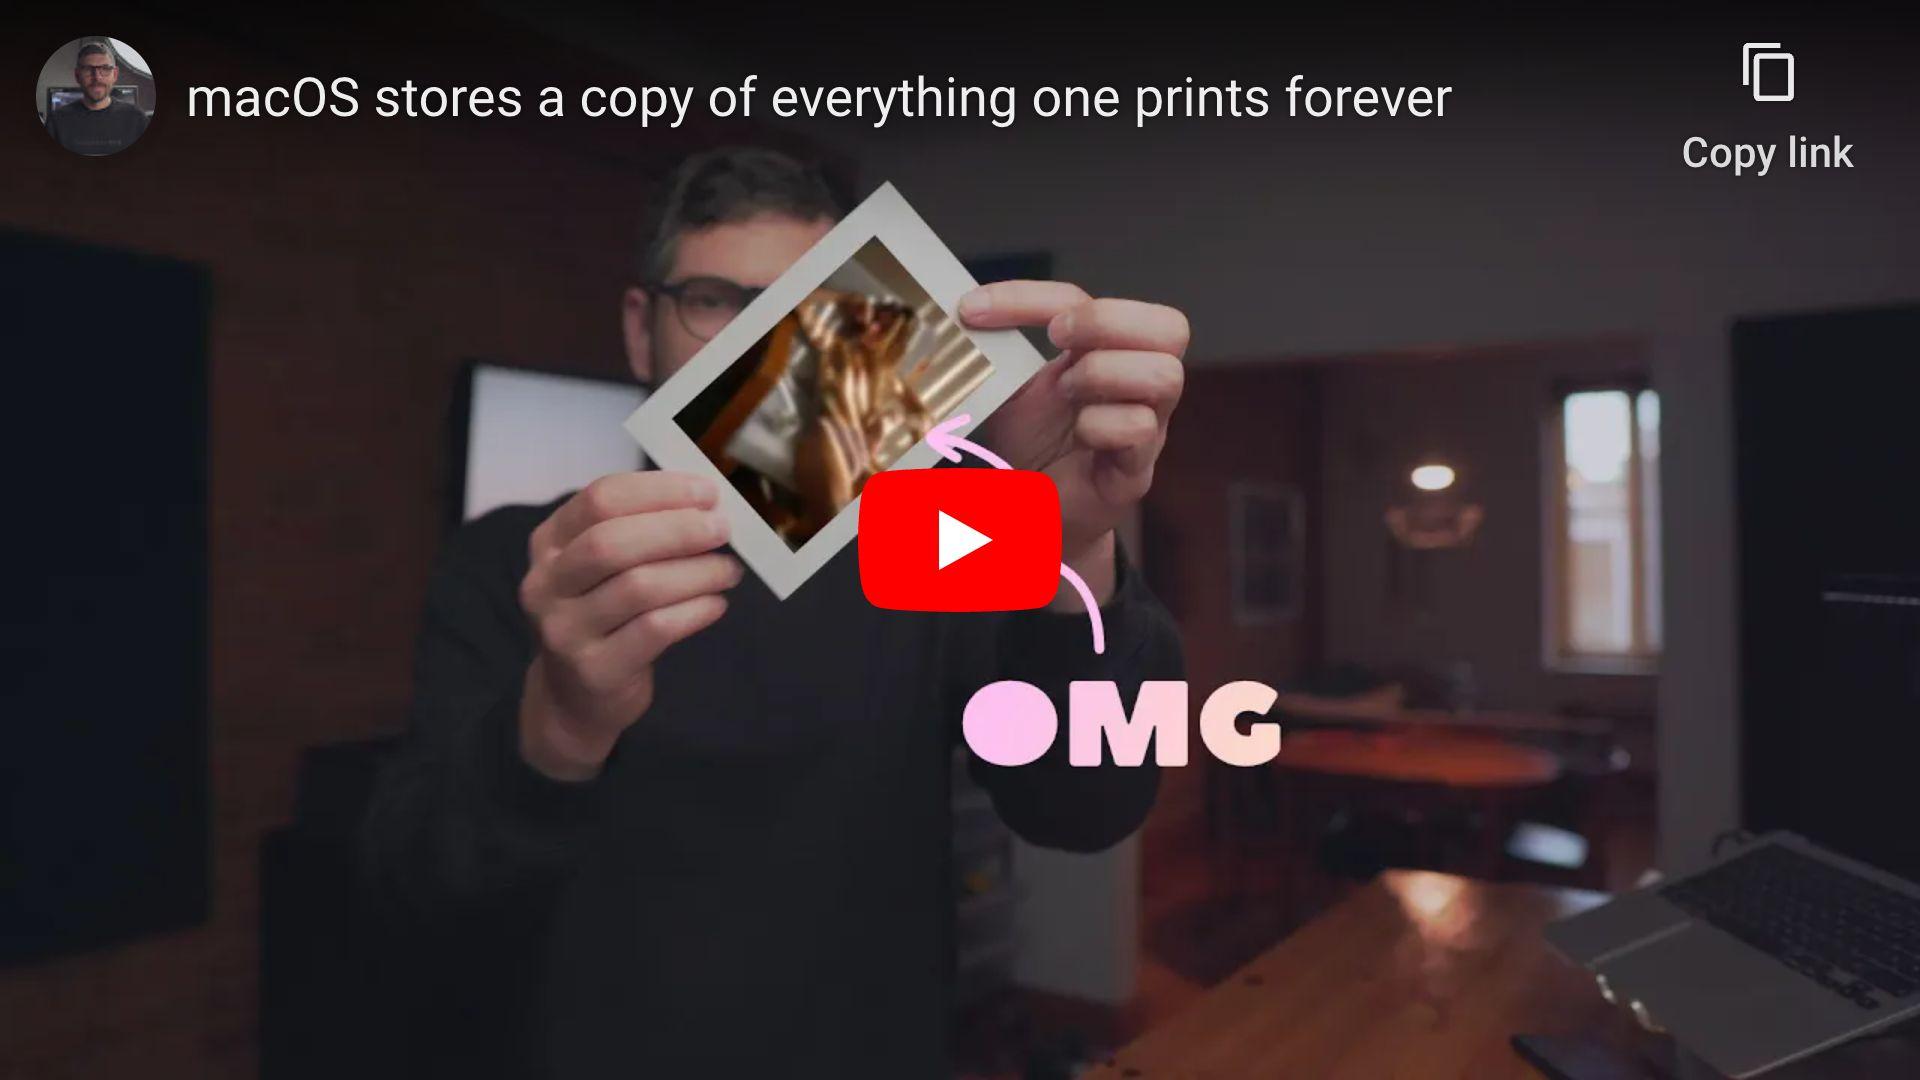 macOS stores a copy of everything one prints forever